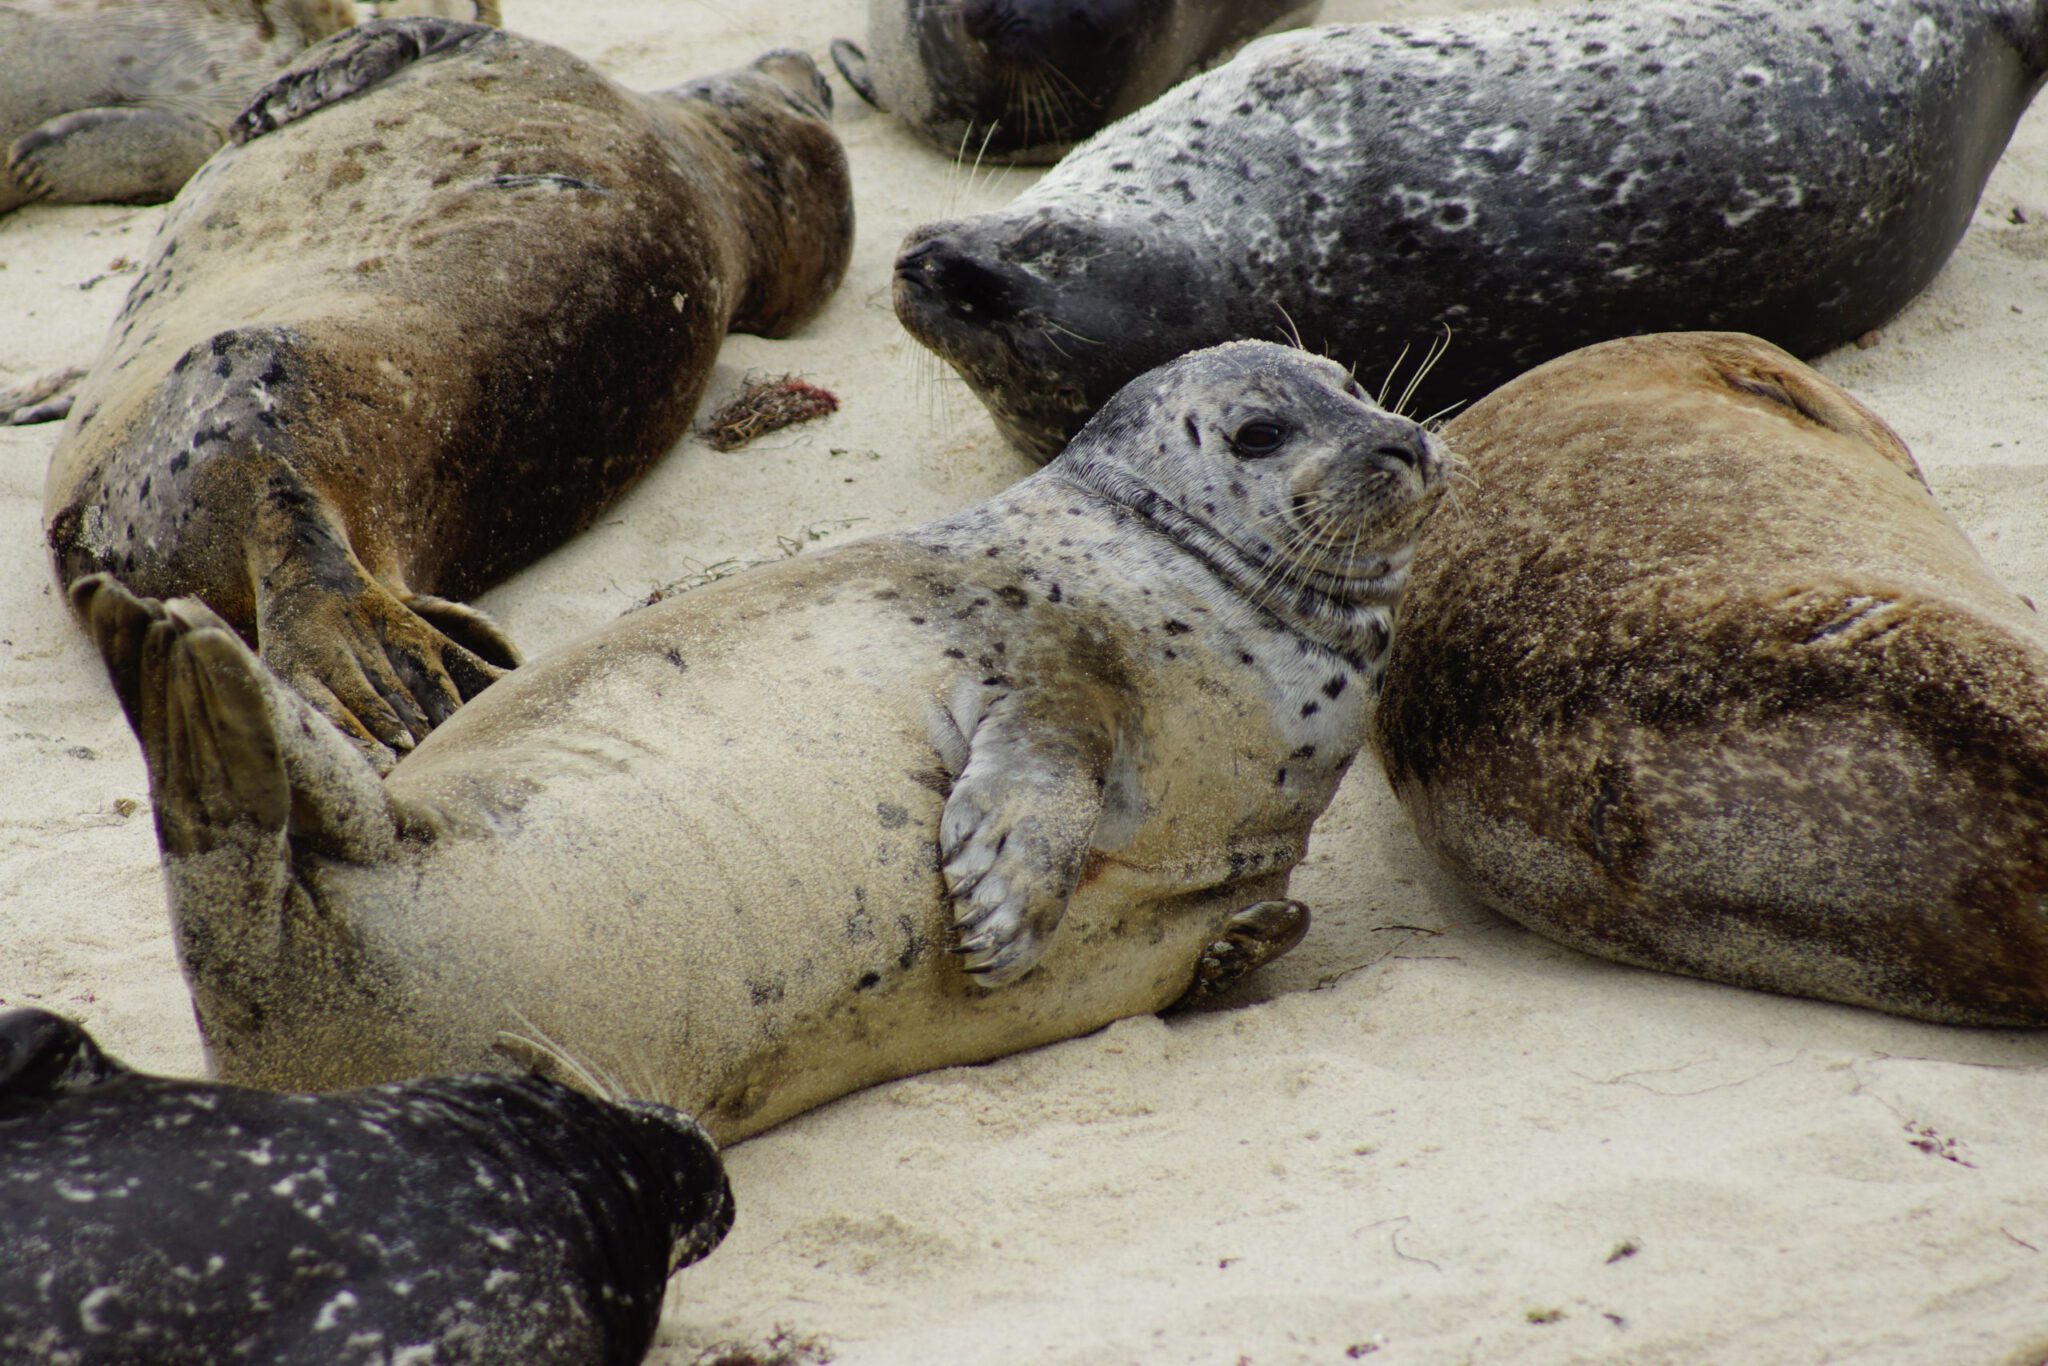 famous animals in La Jolla, seven sleepy harbor seals in La Jolla take naps on the beach in a group, but not touching